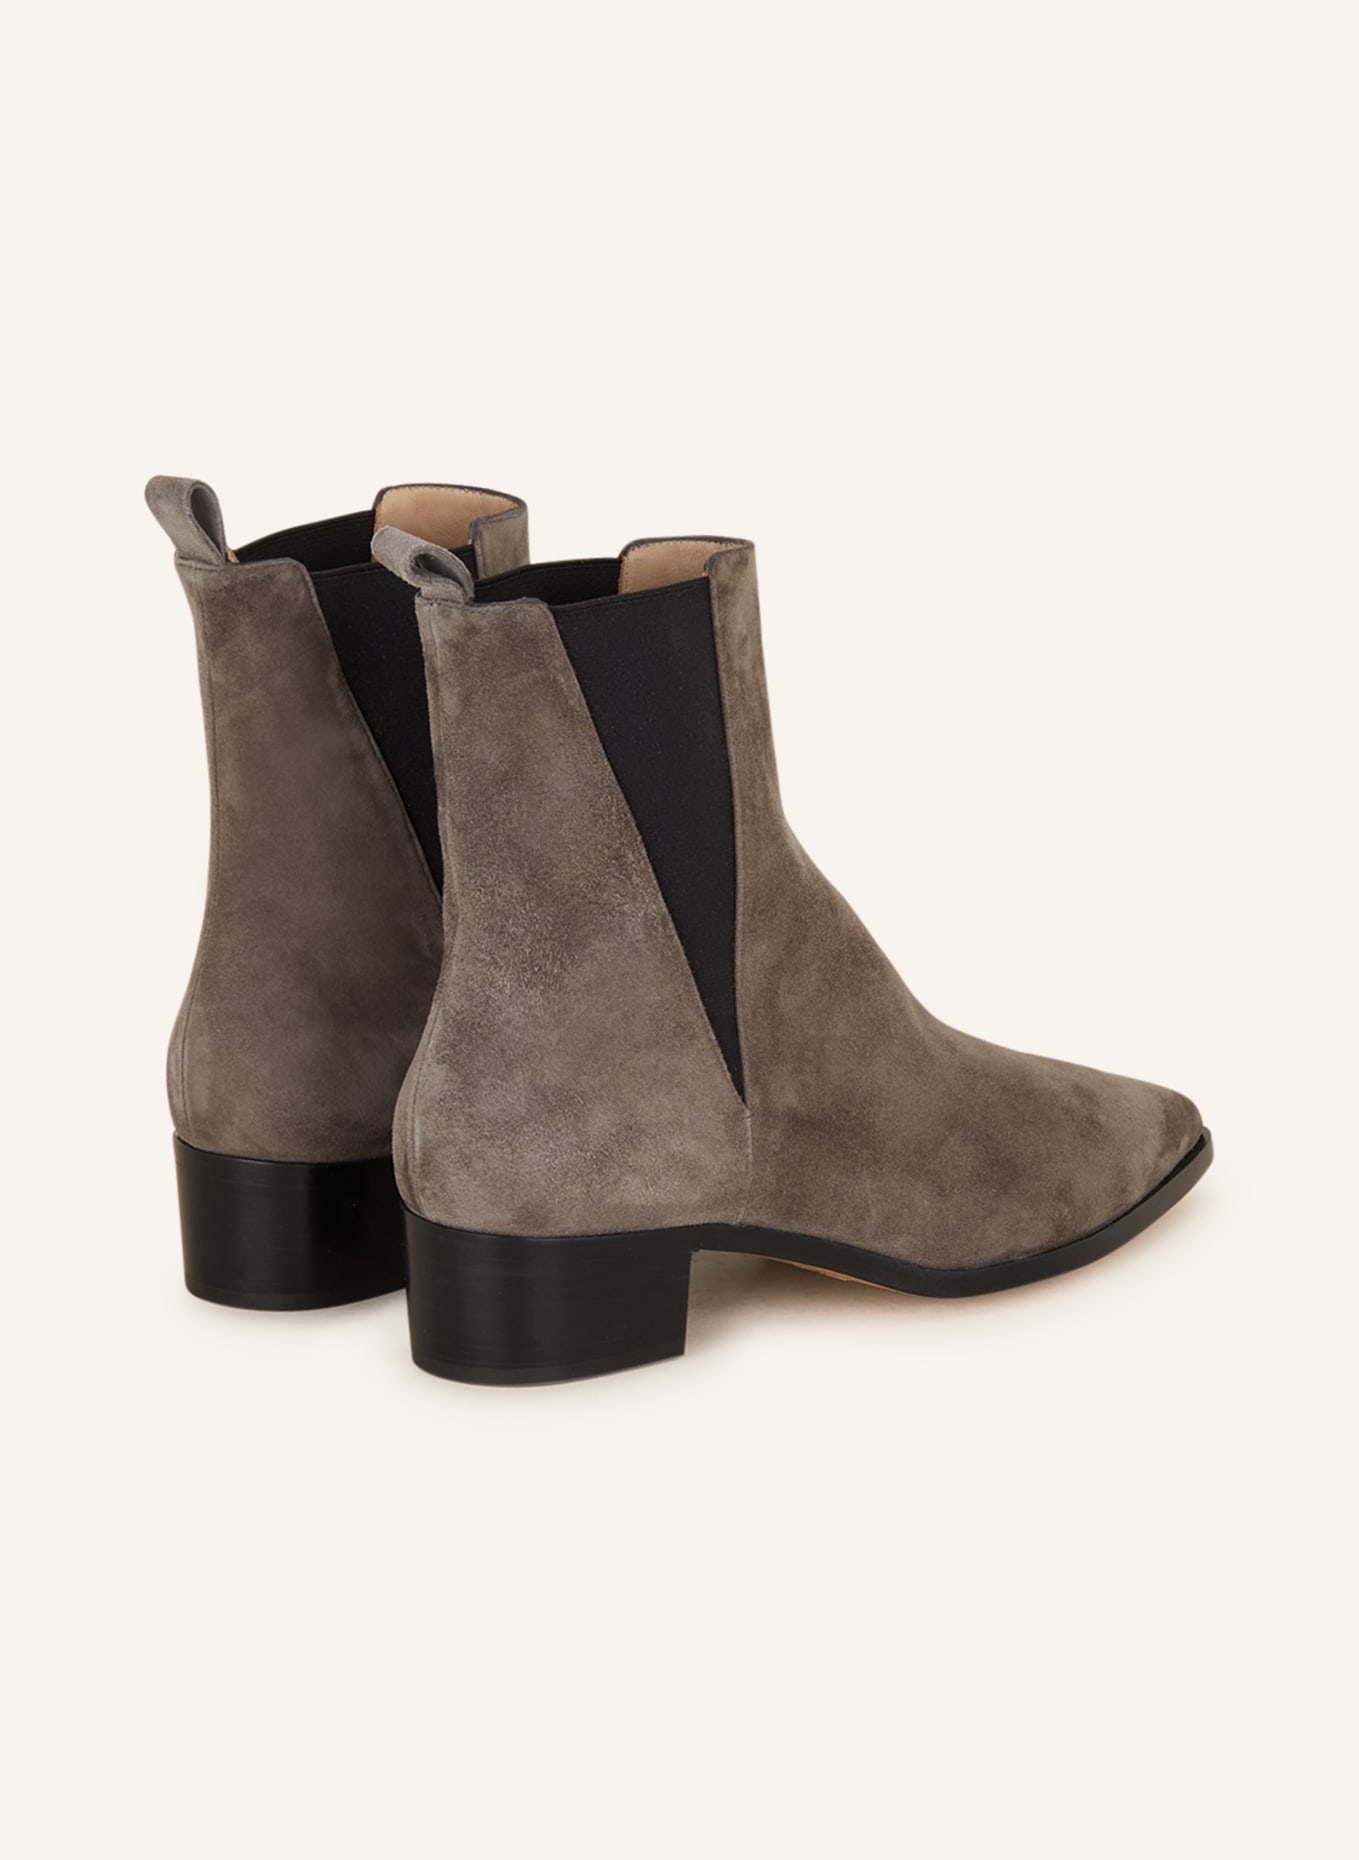 POMME D'OR Chelsea-Boots SIBYL, Farbe: TAUPE/ SCHWARZ (Bild 2)